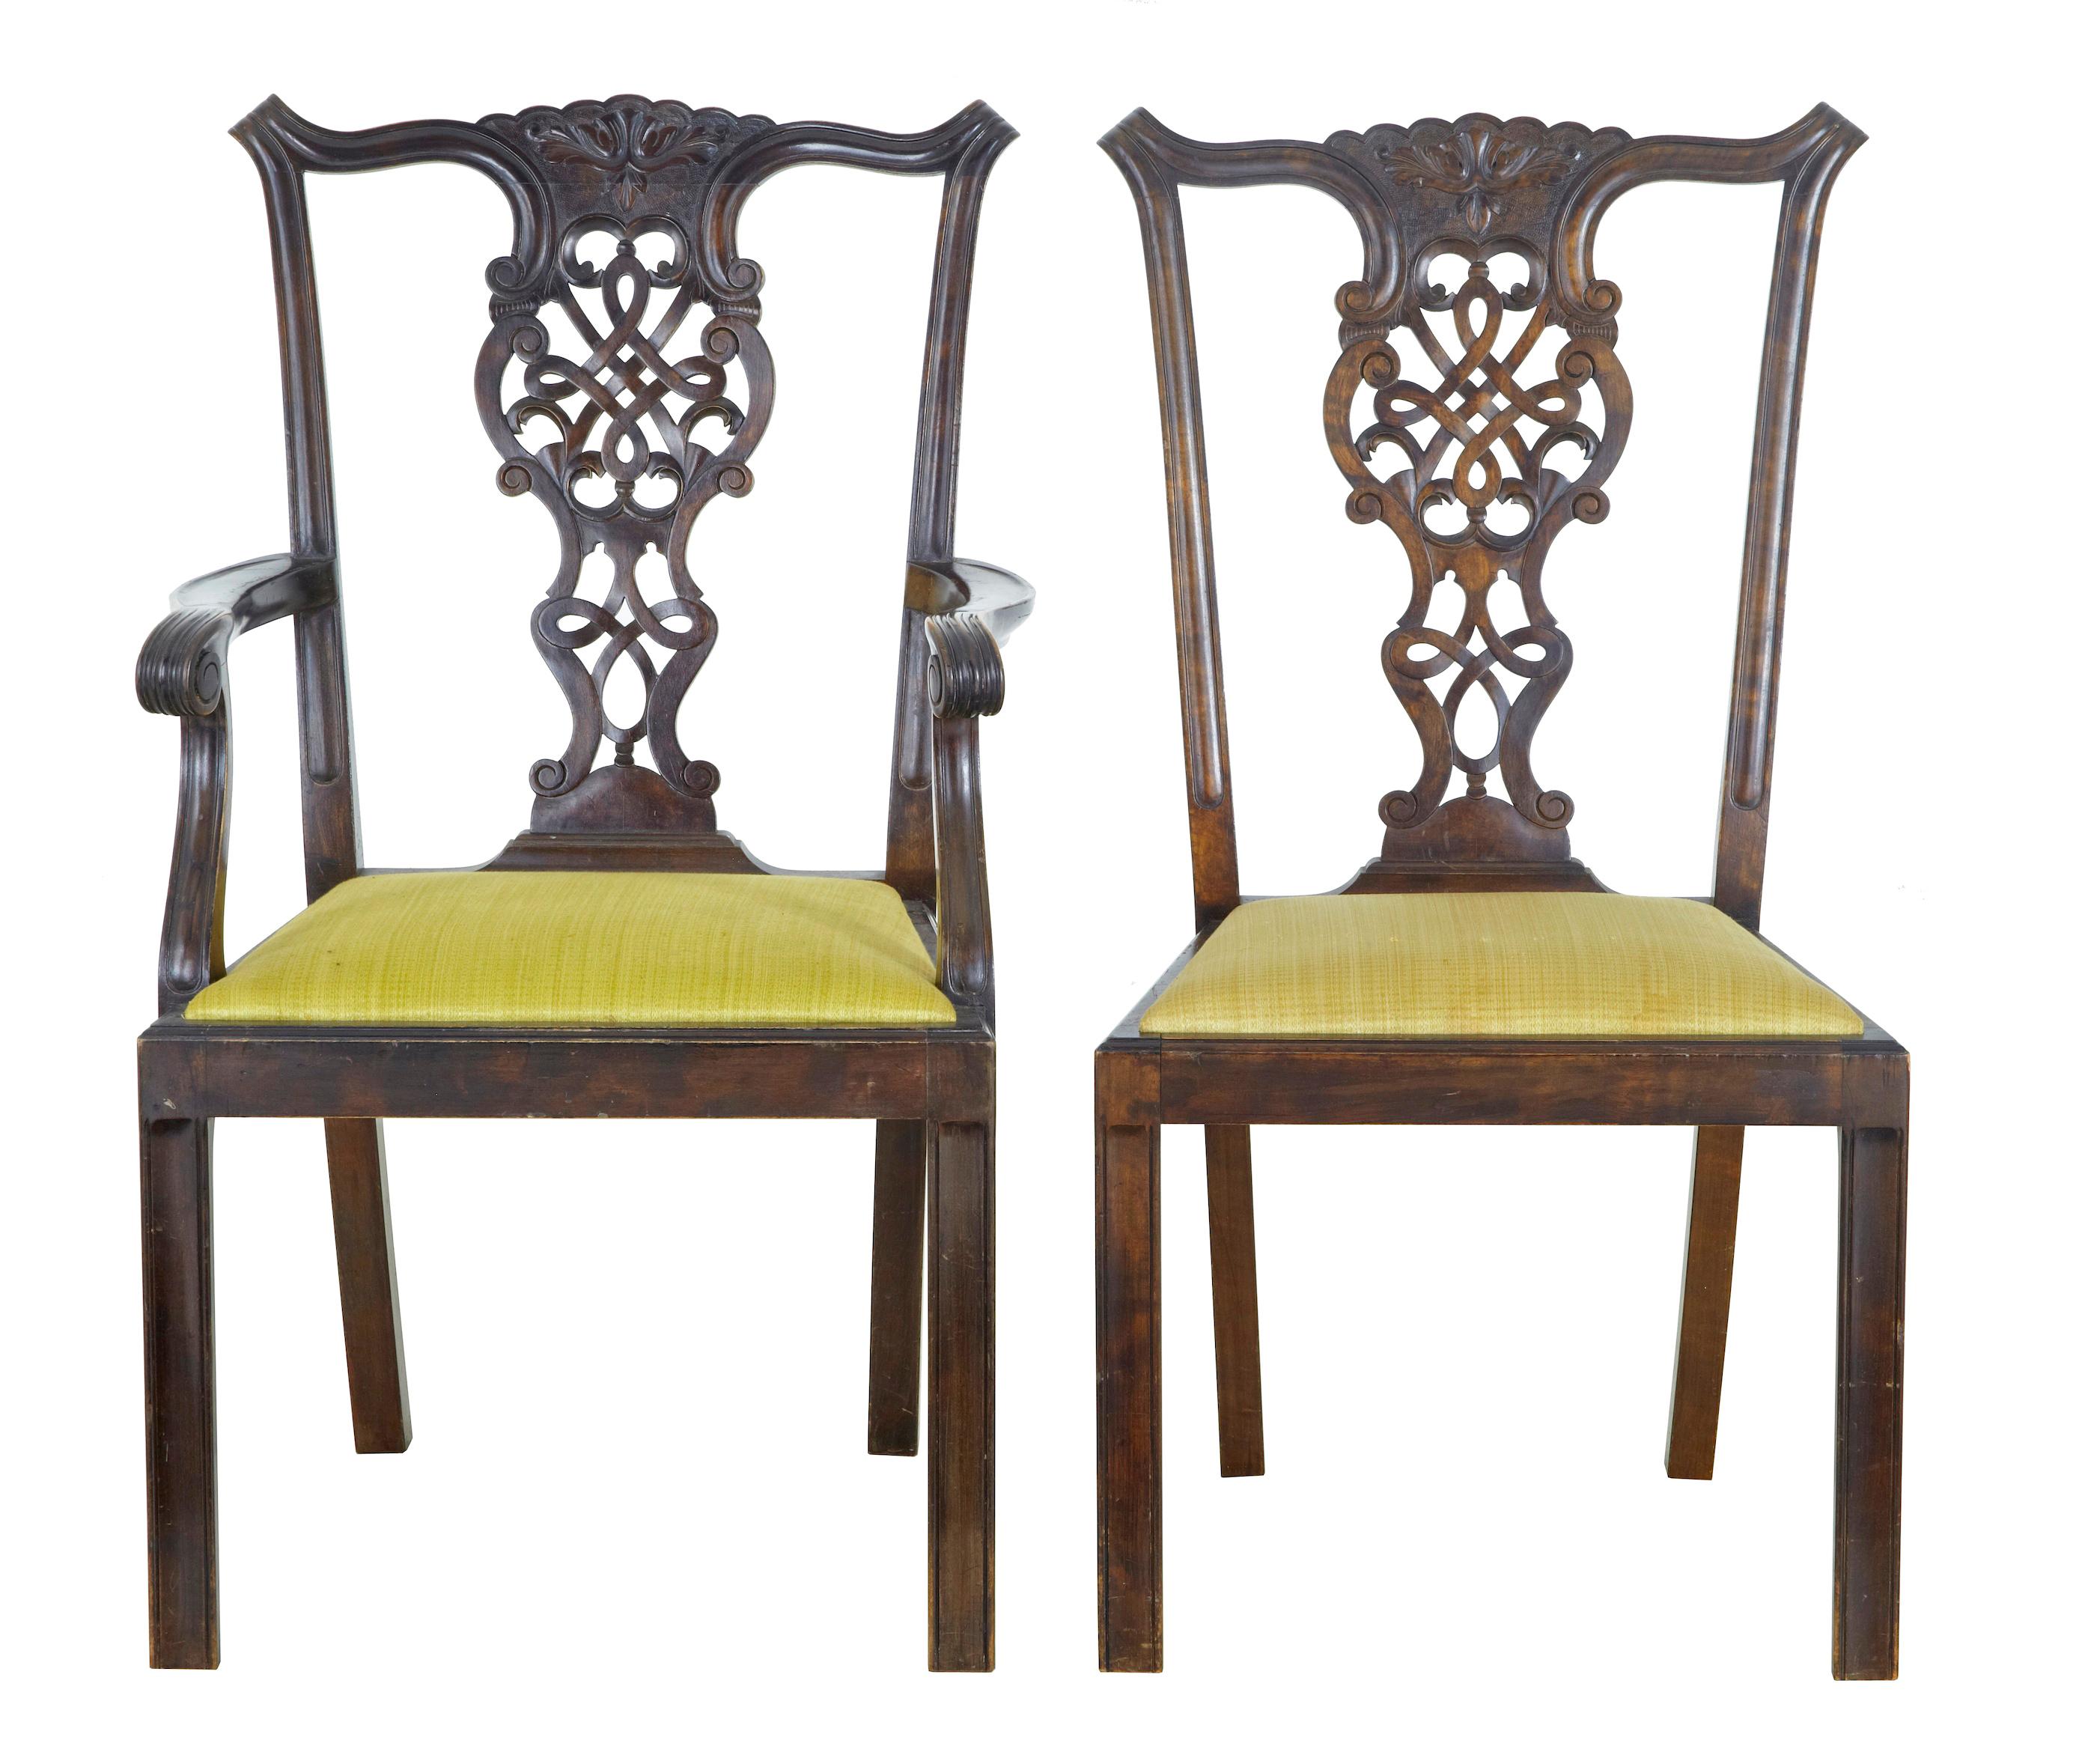 Set of 8+2 19th century carved birch chippendale design dining chairs circa 1890.

Comprising of 6 single and 2 armchairs. Pierced and carved back rests, carved and shaped scrolling arms. Stained dark birch in colour. Structurally sound. Drop in